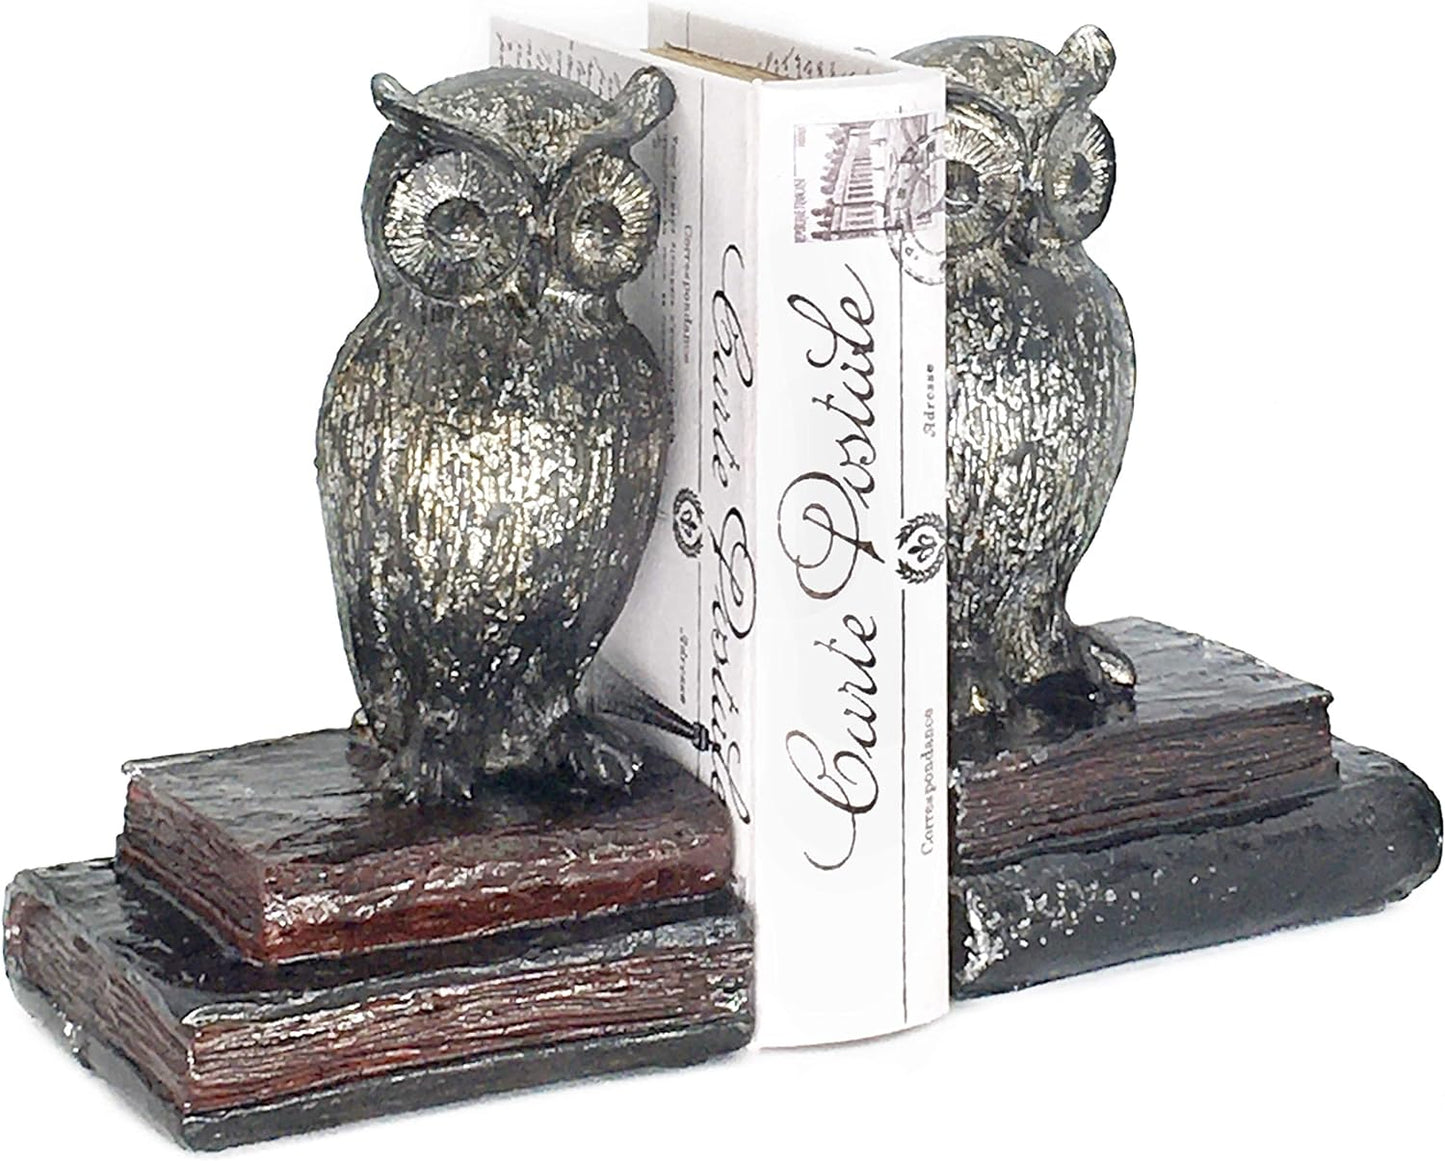 Decorative Bookends Owl Wide Eyed Rustic Retro Shabby Chic Unique Book Ends Birds Boho Farmhouse Home Decoration Office Library Shelves Stoppers Holder Nonskid Scholastic Kids Vintage